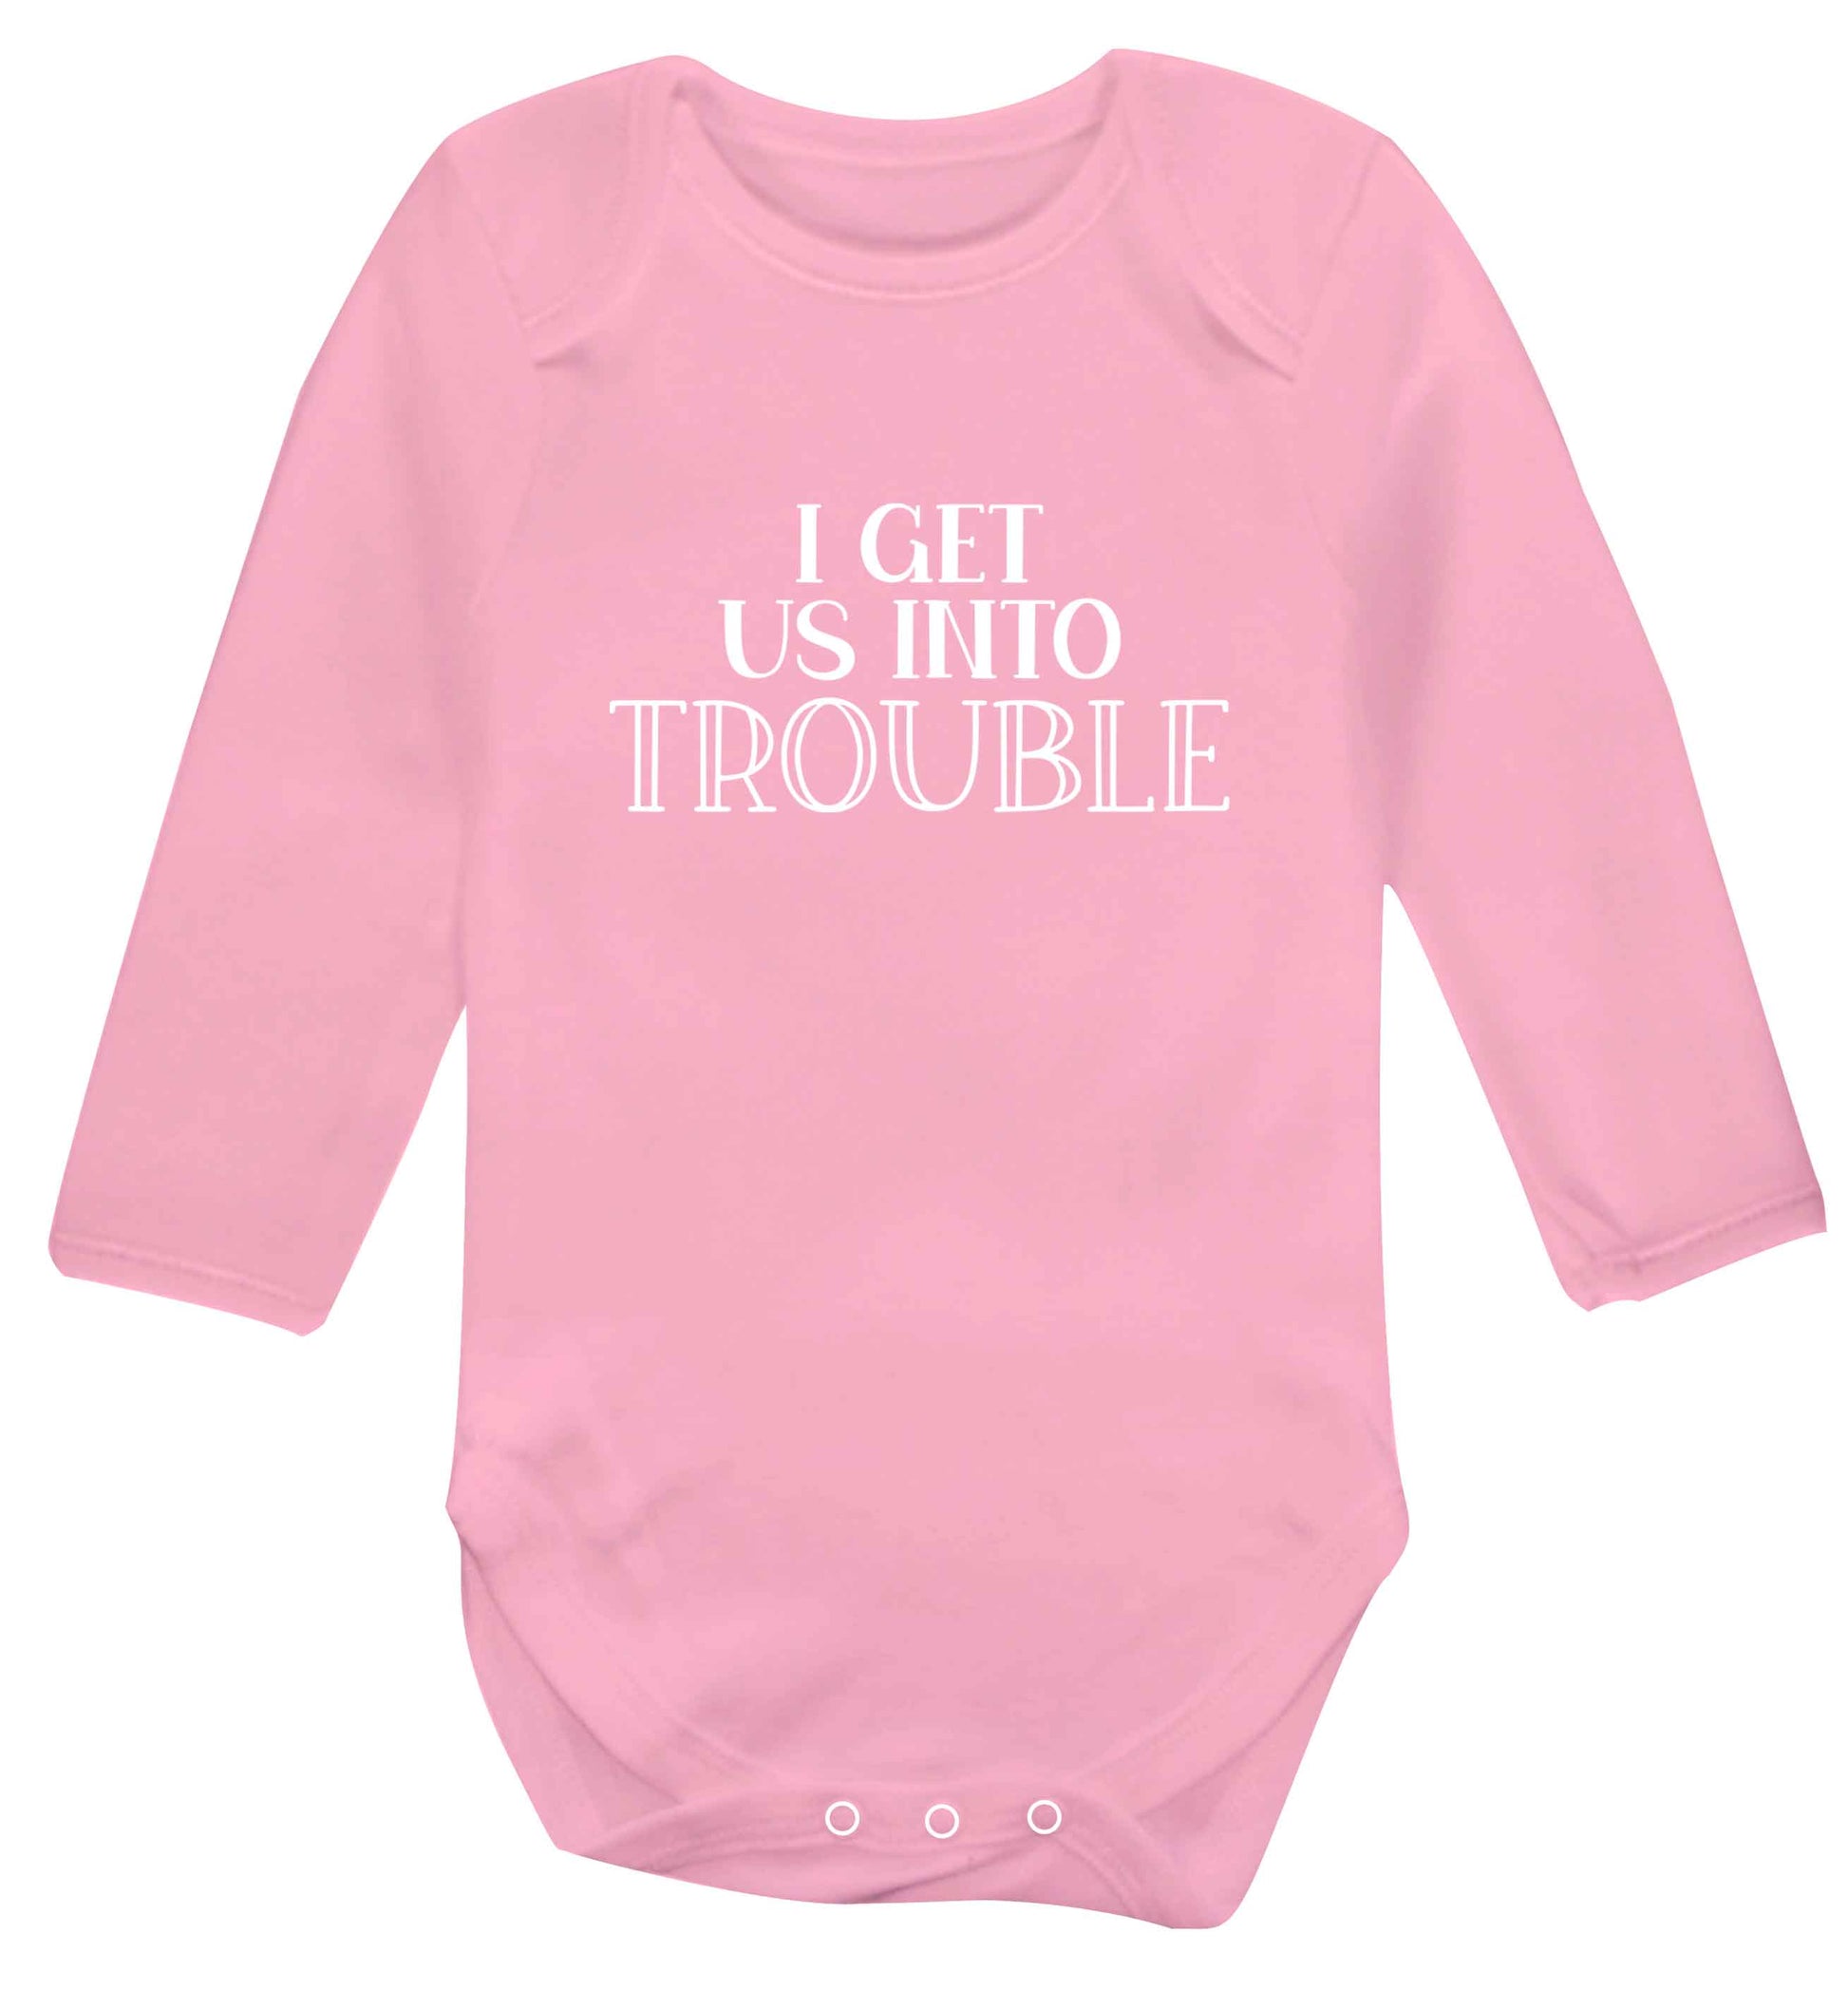 I get us into trouble baby vest long sleeved pale pink 6-12 months